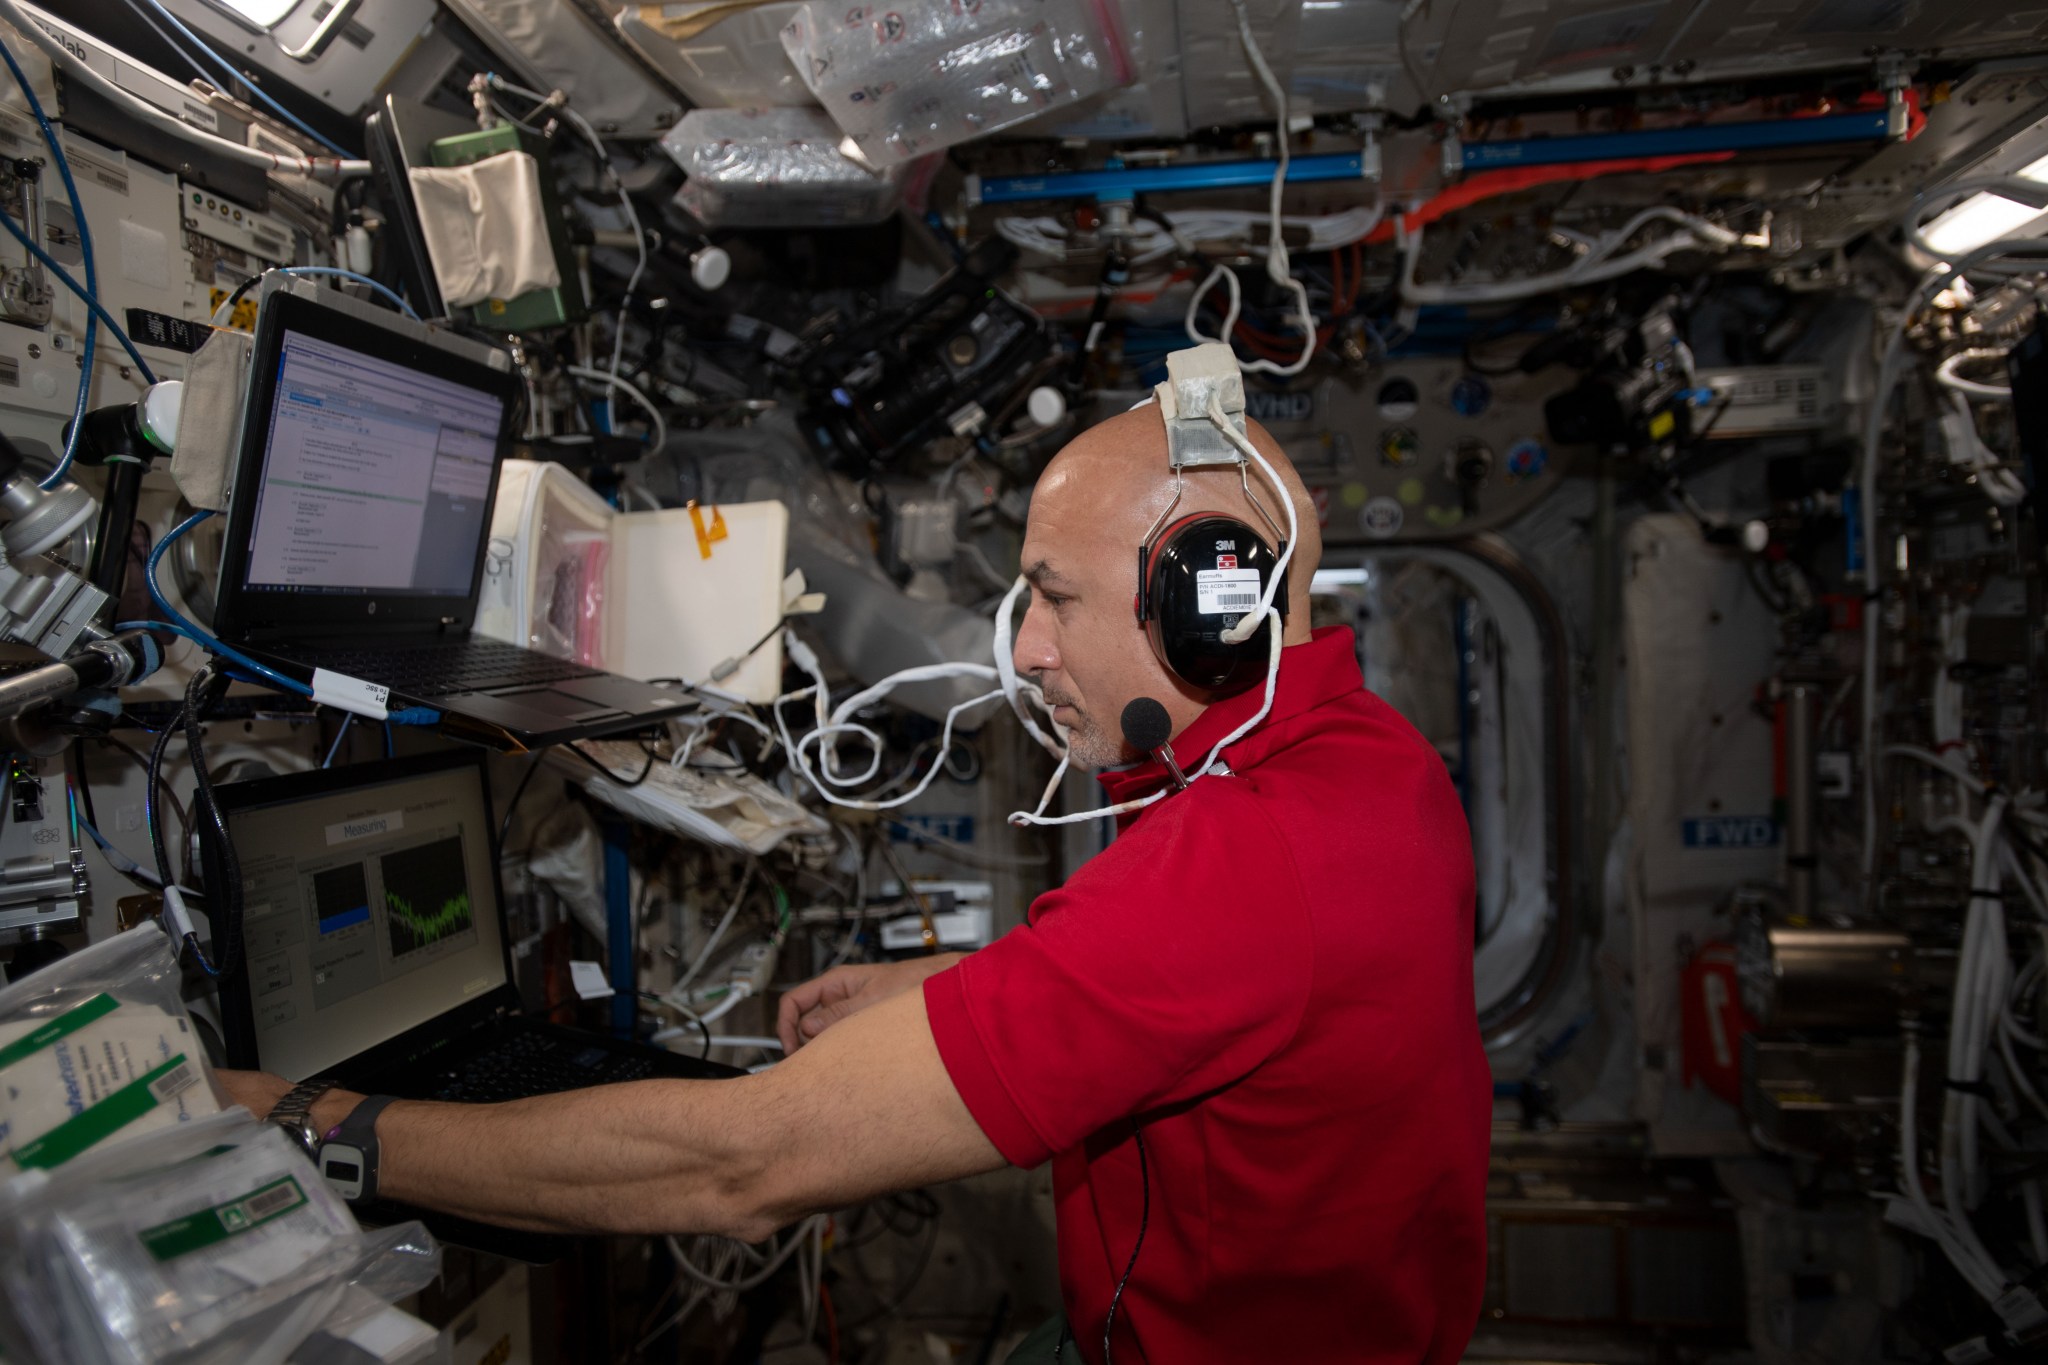 hearing test aboard the International Space Station (ISS)